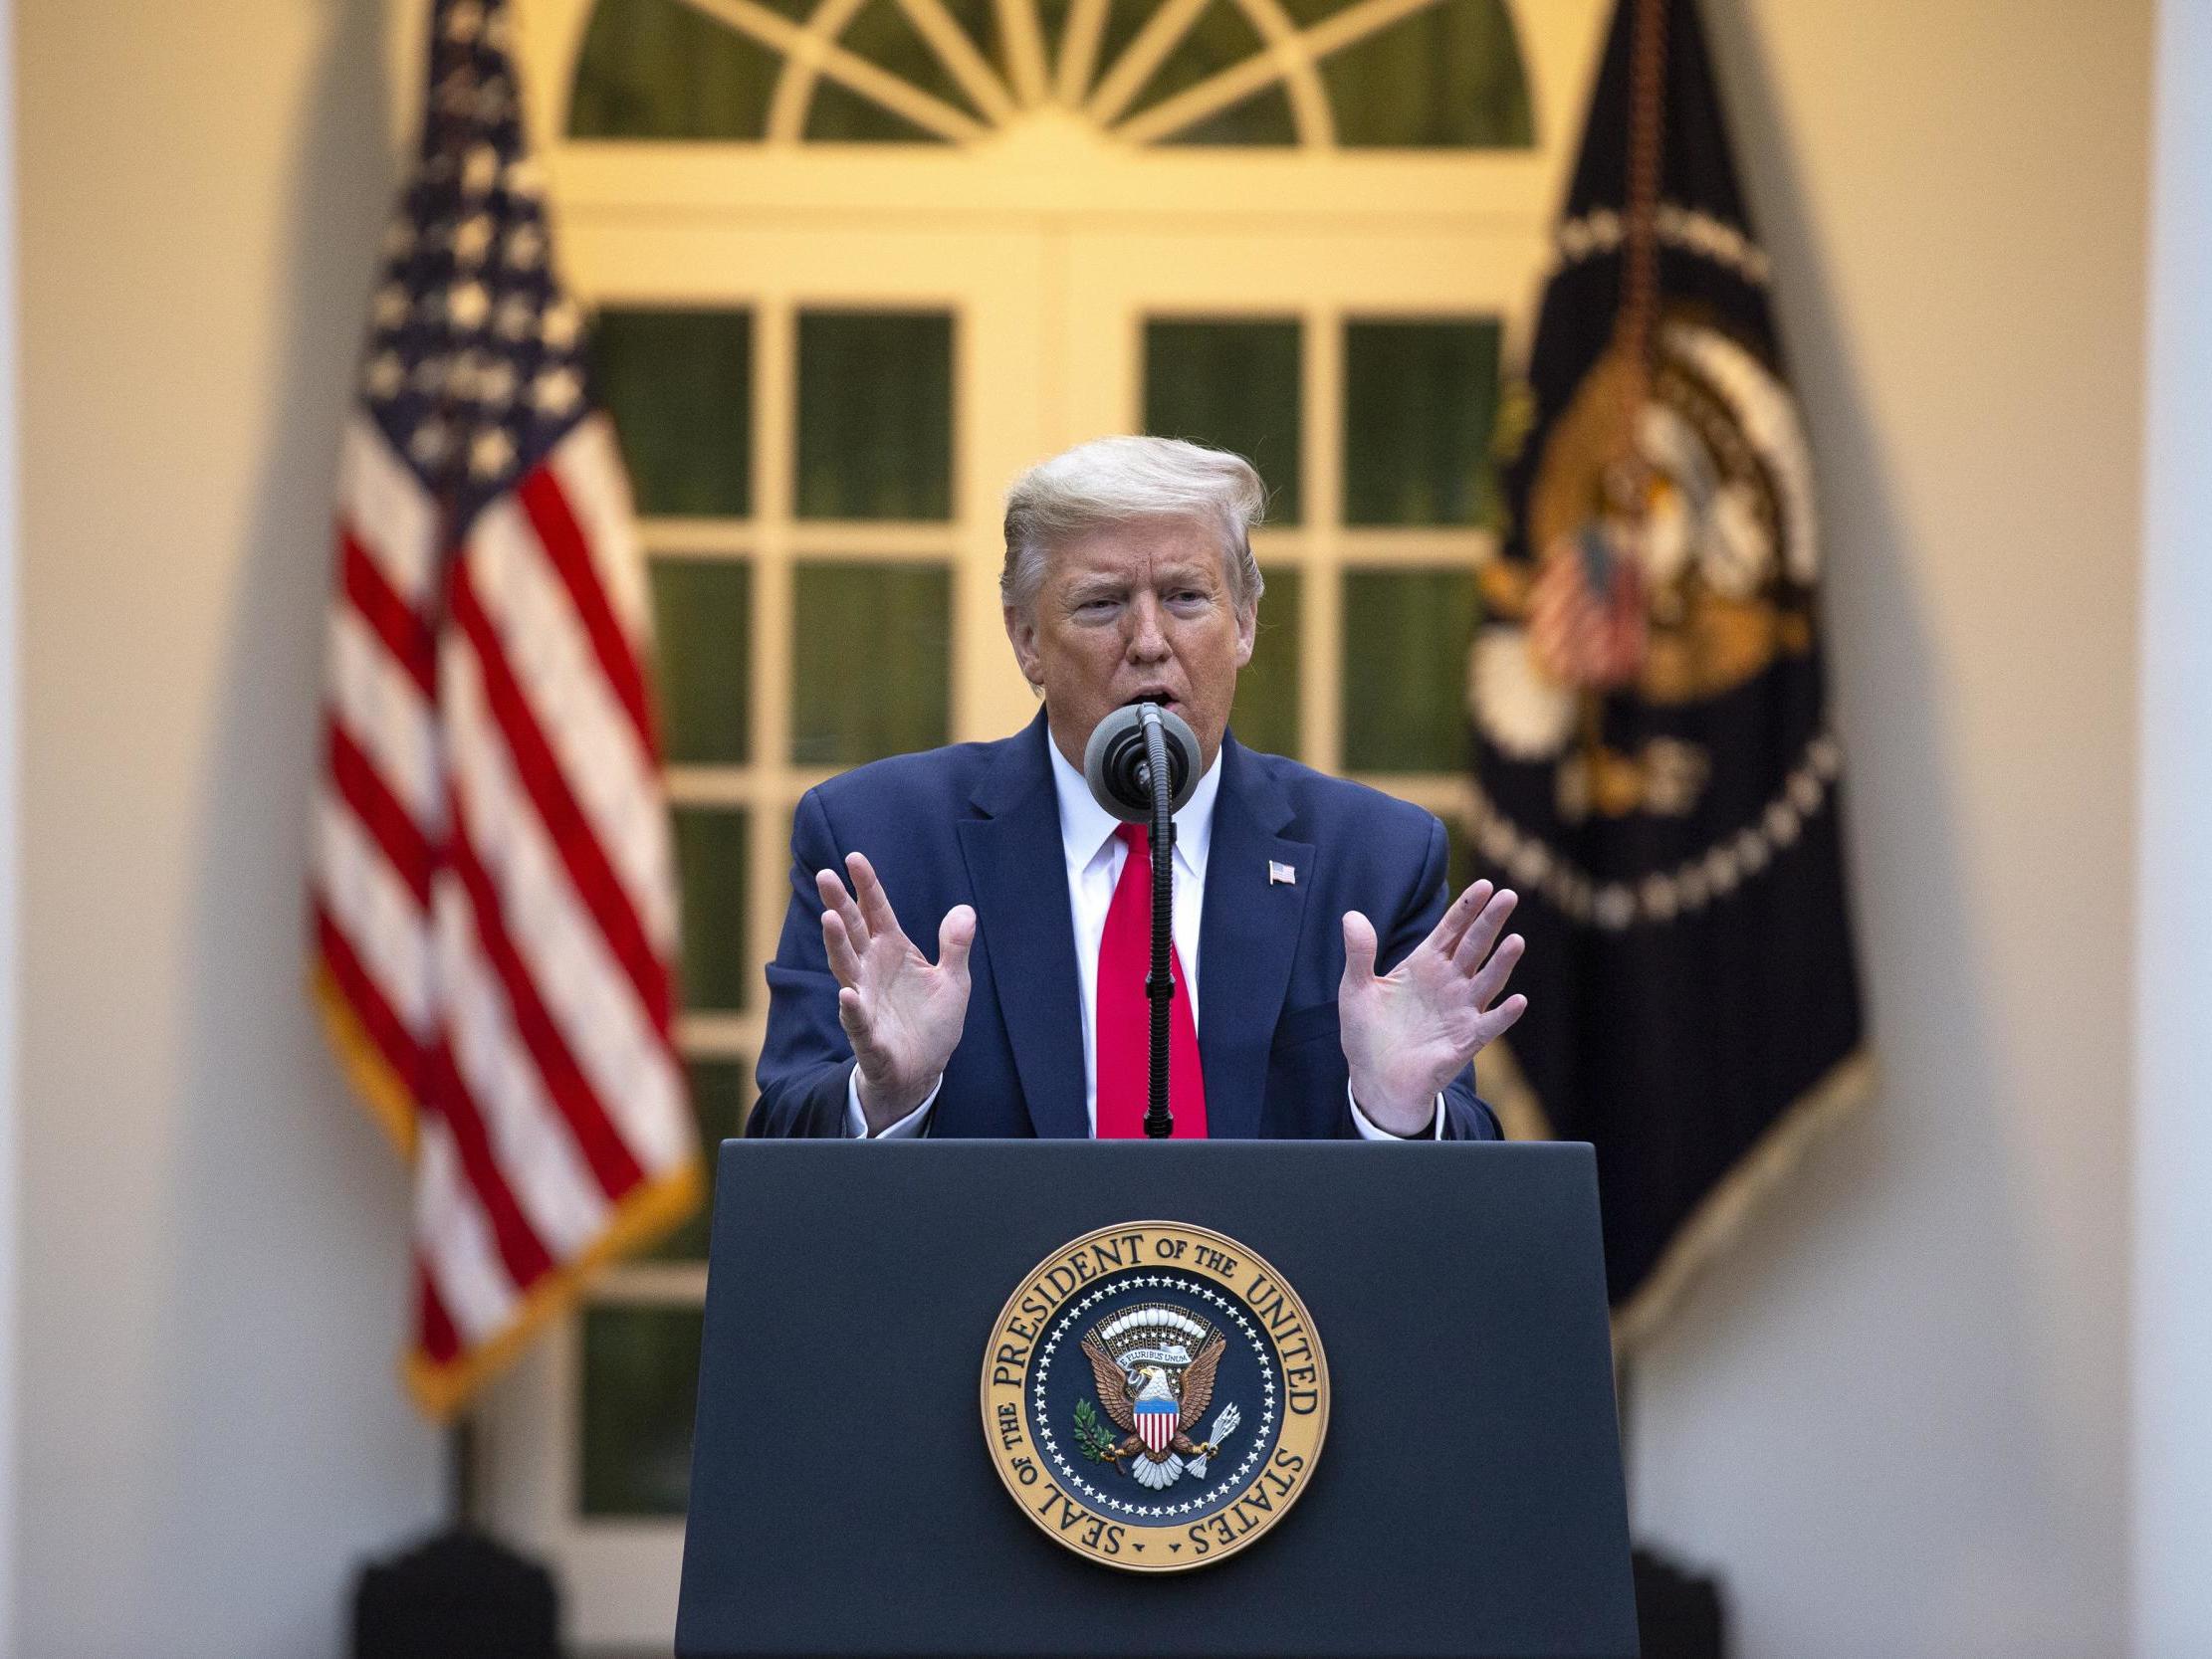 President Donald Trump speaking at his daily briefing on Tuesday